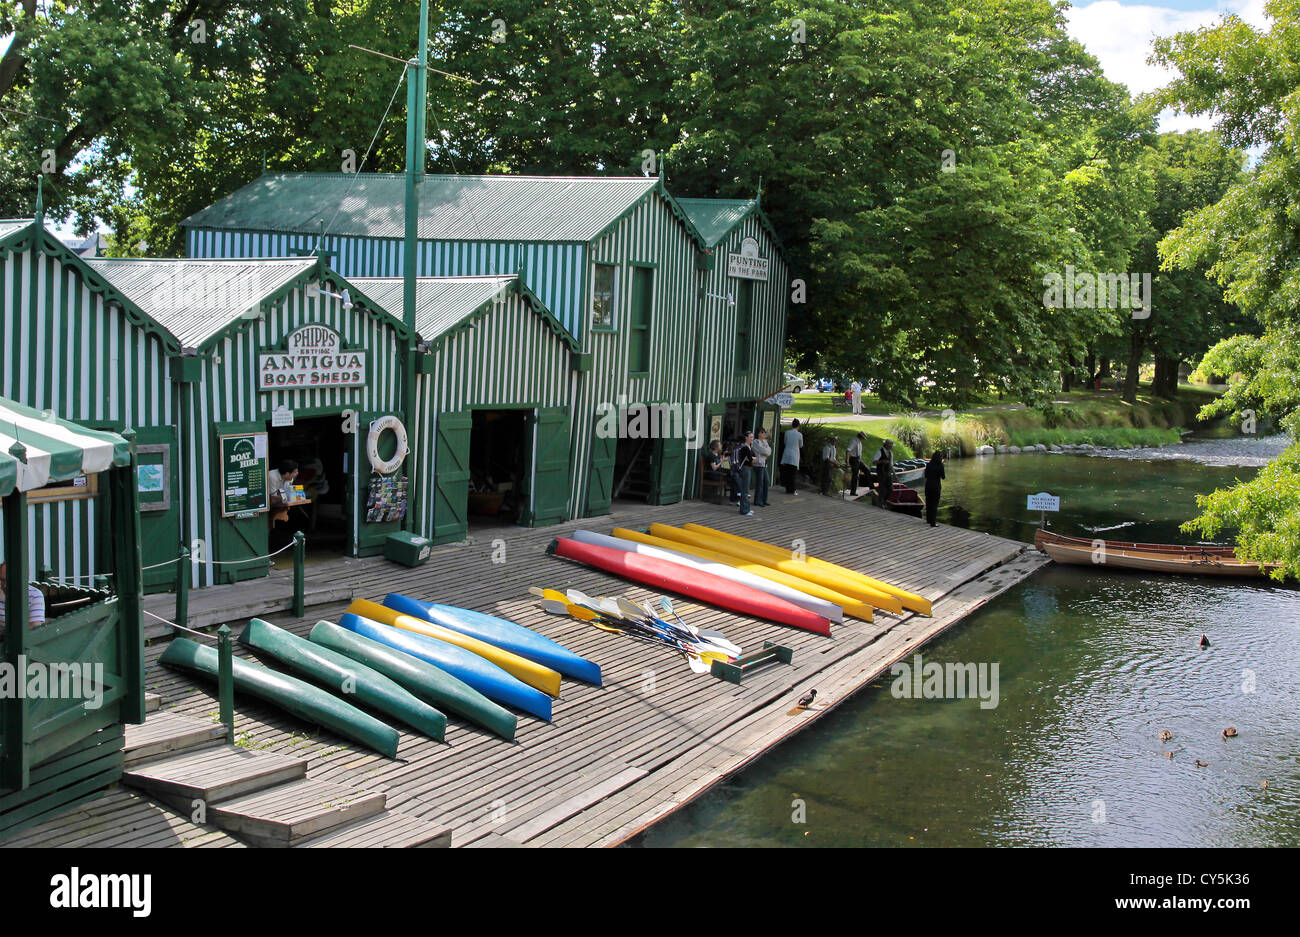 Antigua Boat sheds at the river Avon in Christchurch, Canterbury, South Island, New Zealand Stock Photo